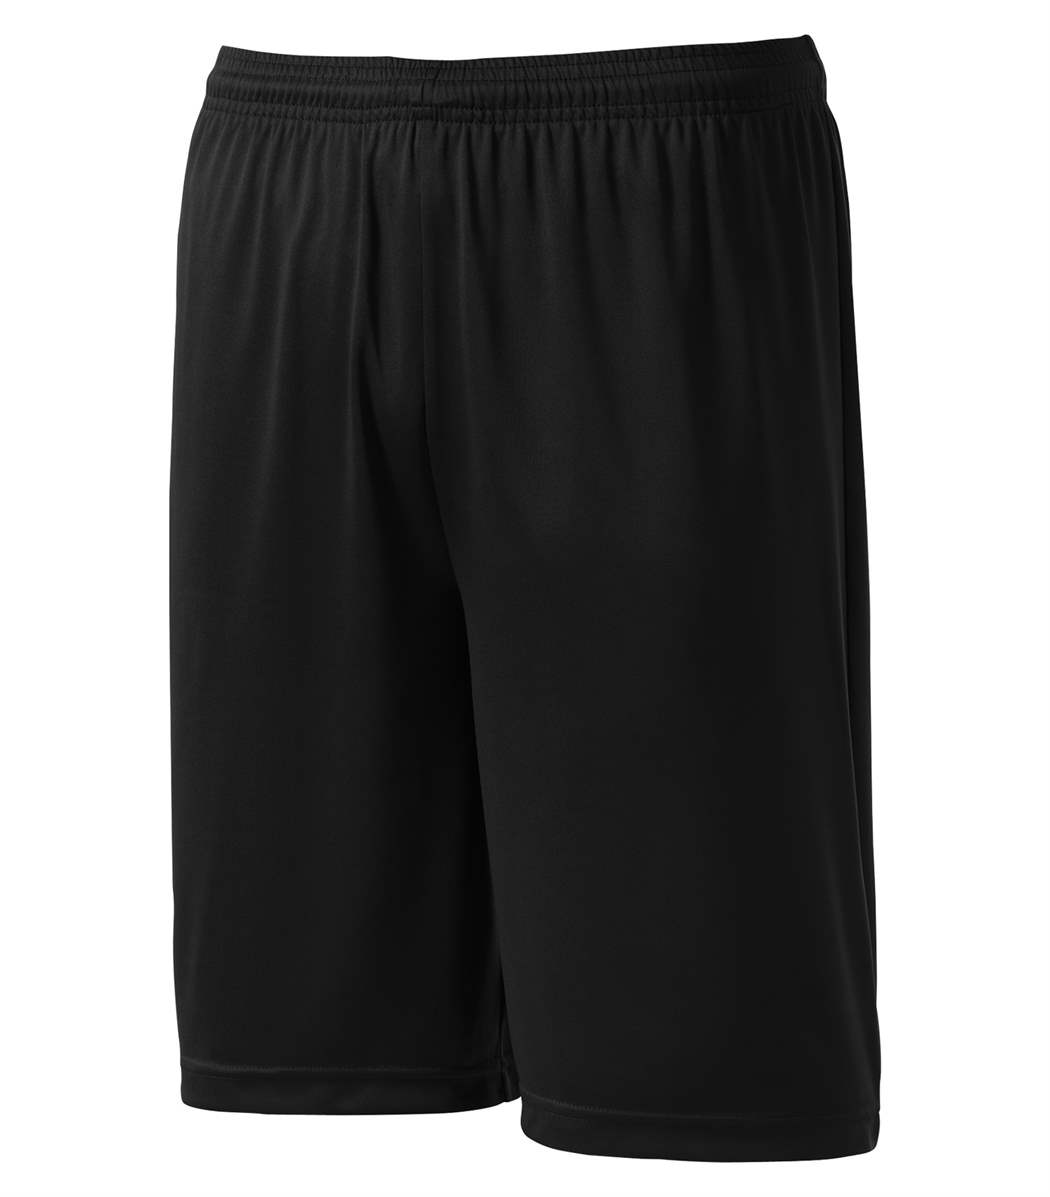 ATC S355 PRO TEAM SHORTS - Great West Graphics